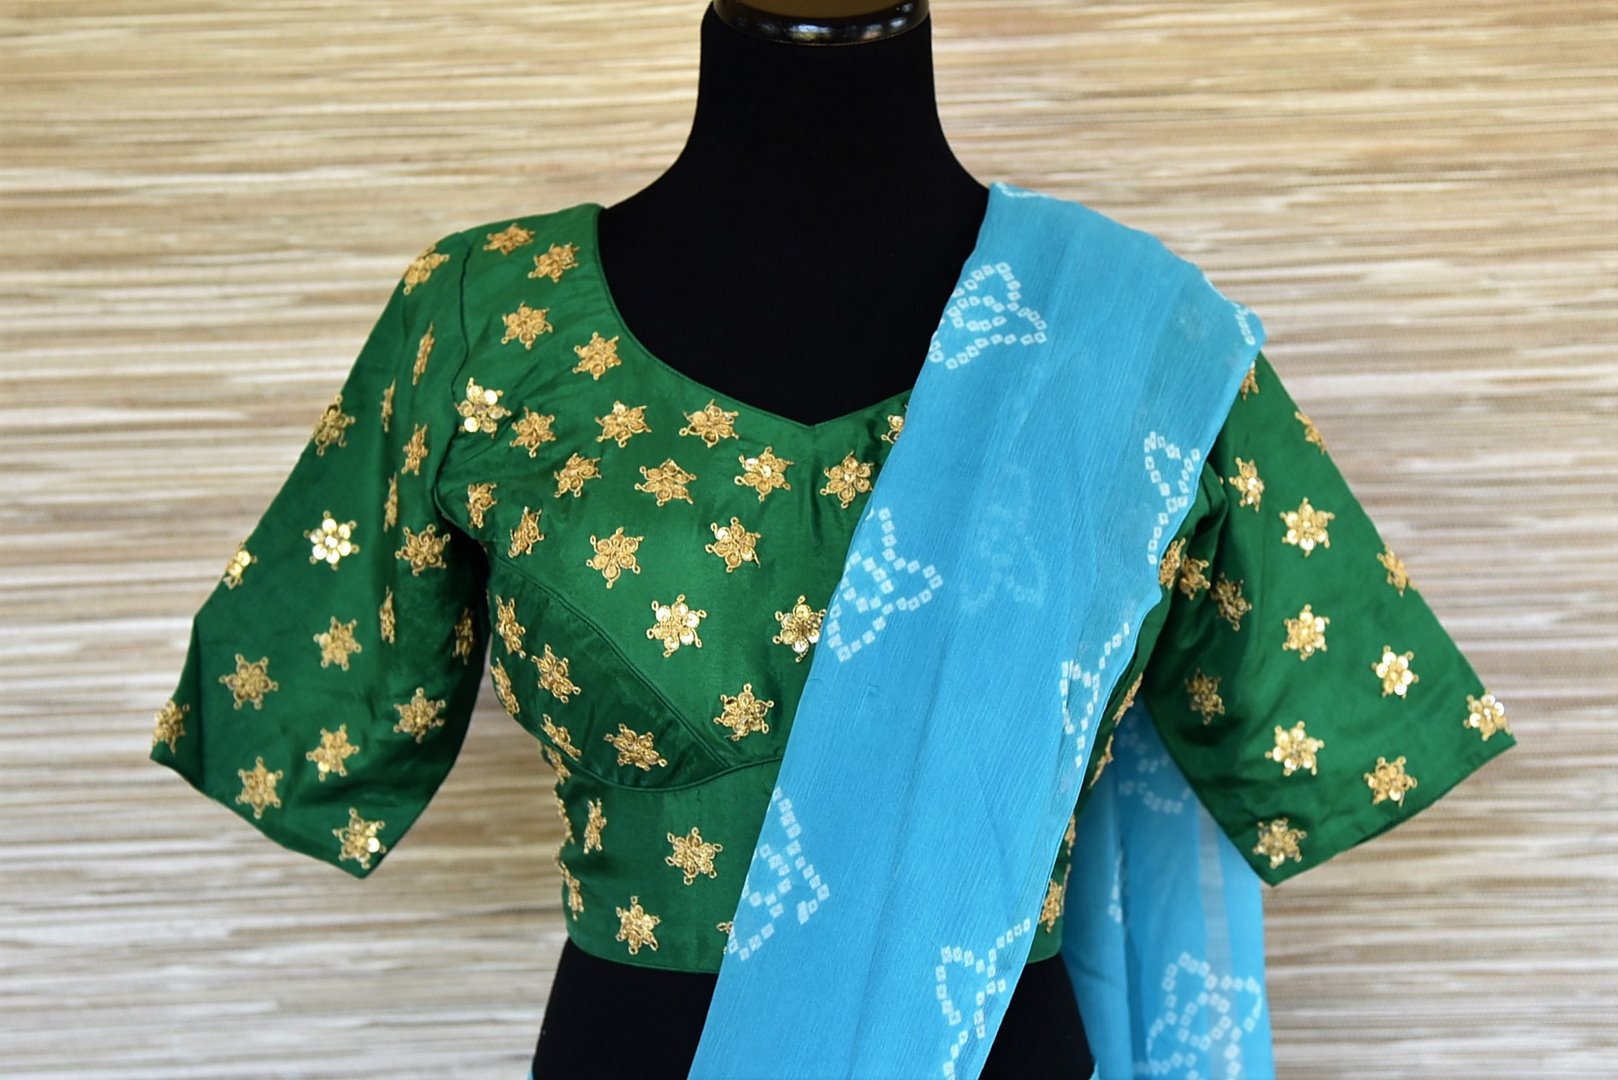 Shop elegant sky blue Bandhej chiffon saree online in USA with embroidered green saree blouse. Be an epitome of elegance and tradition in exquisite designer saris, handwoven saris from Pure Elegance clothing store in USA. -blouse pallu